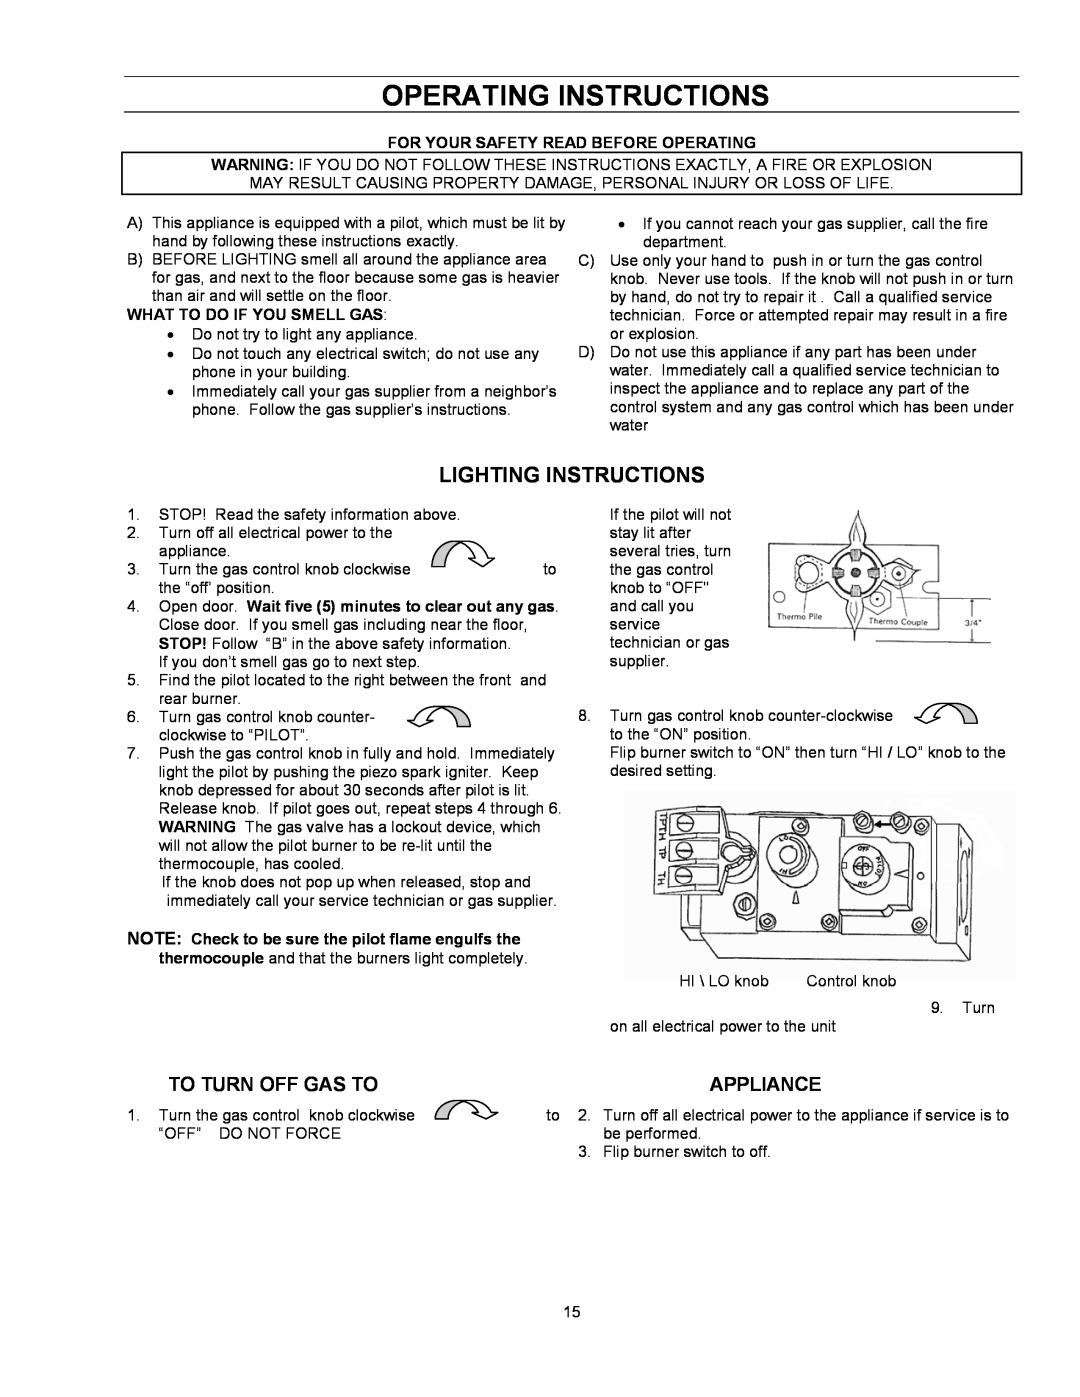 Enviro EG 28 owner manual Operating Instructions, Lighting Instructions, To Turn Off Gas To, Appliance 